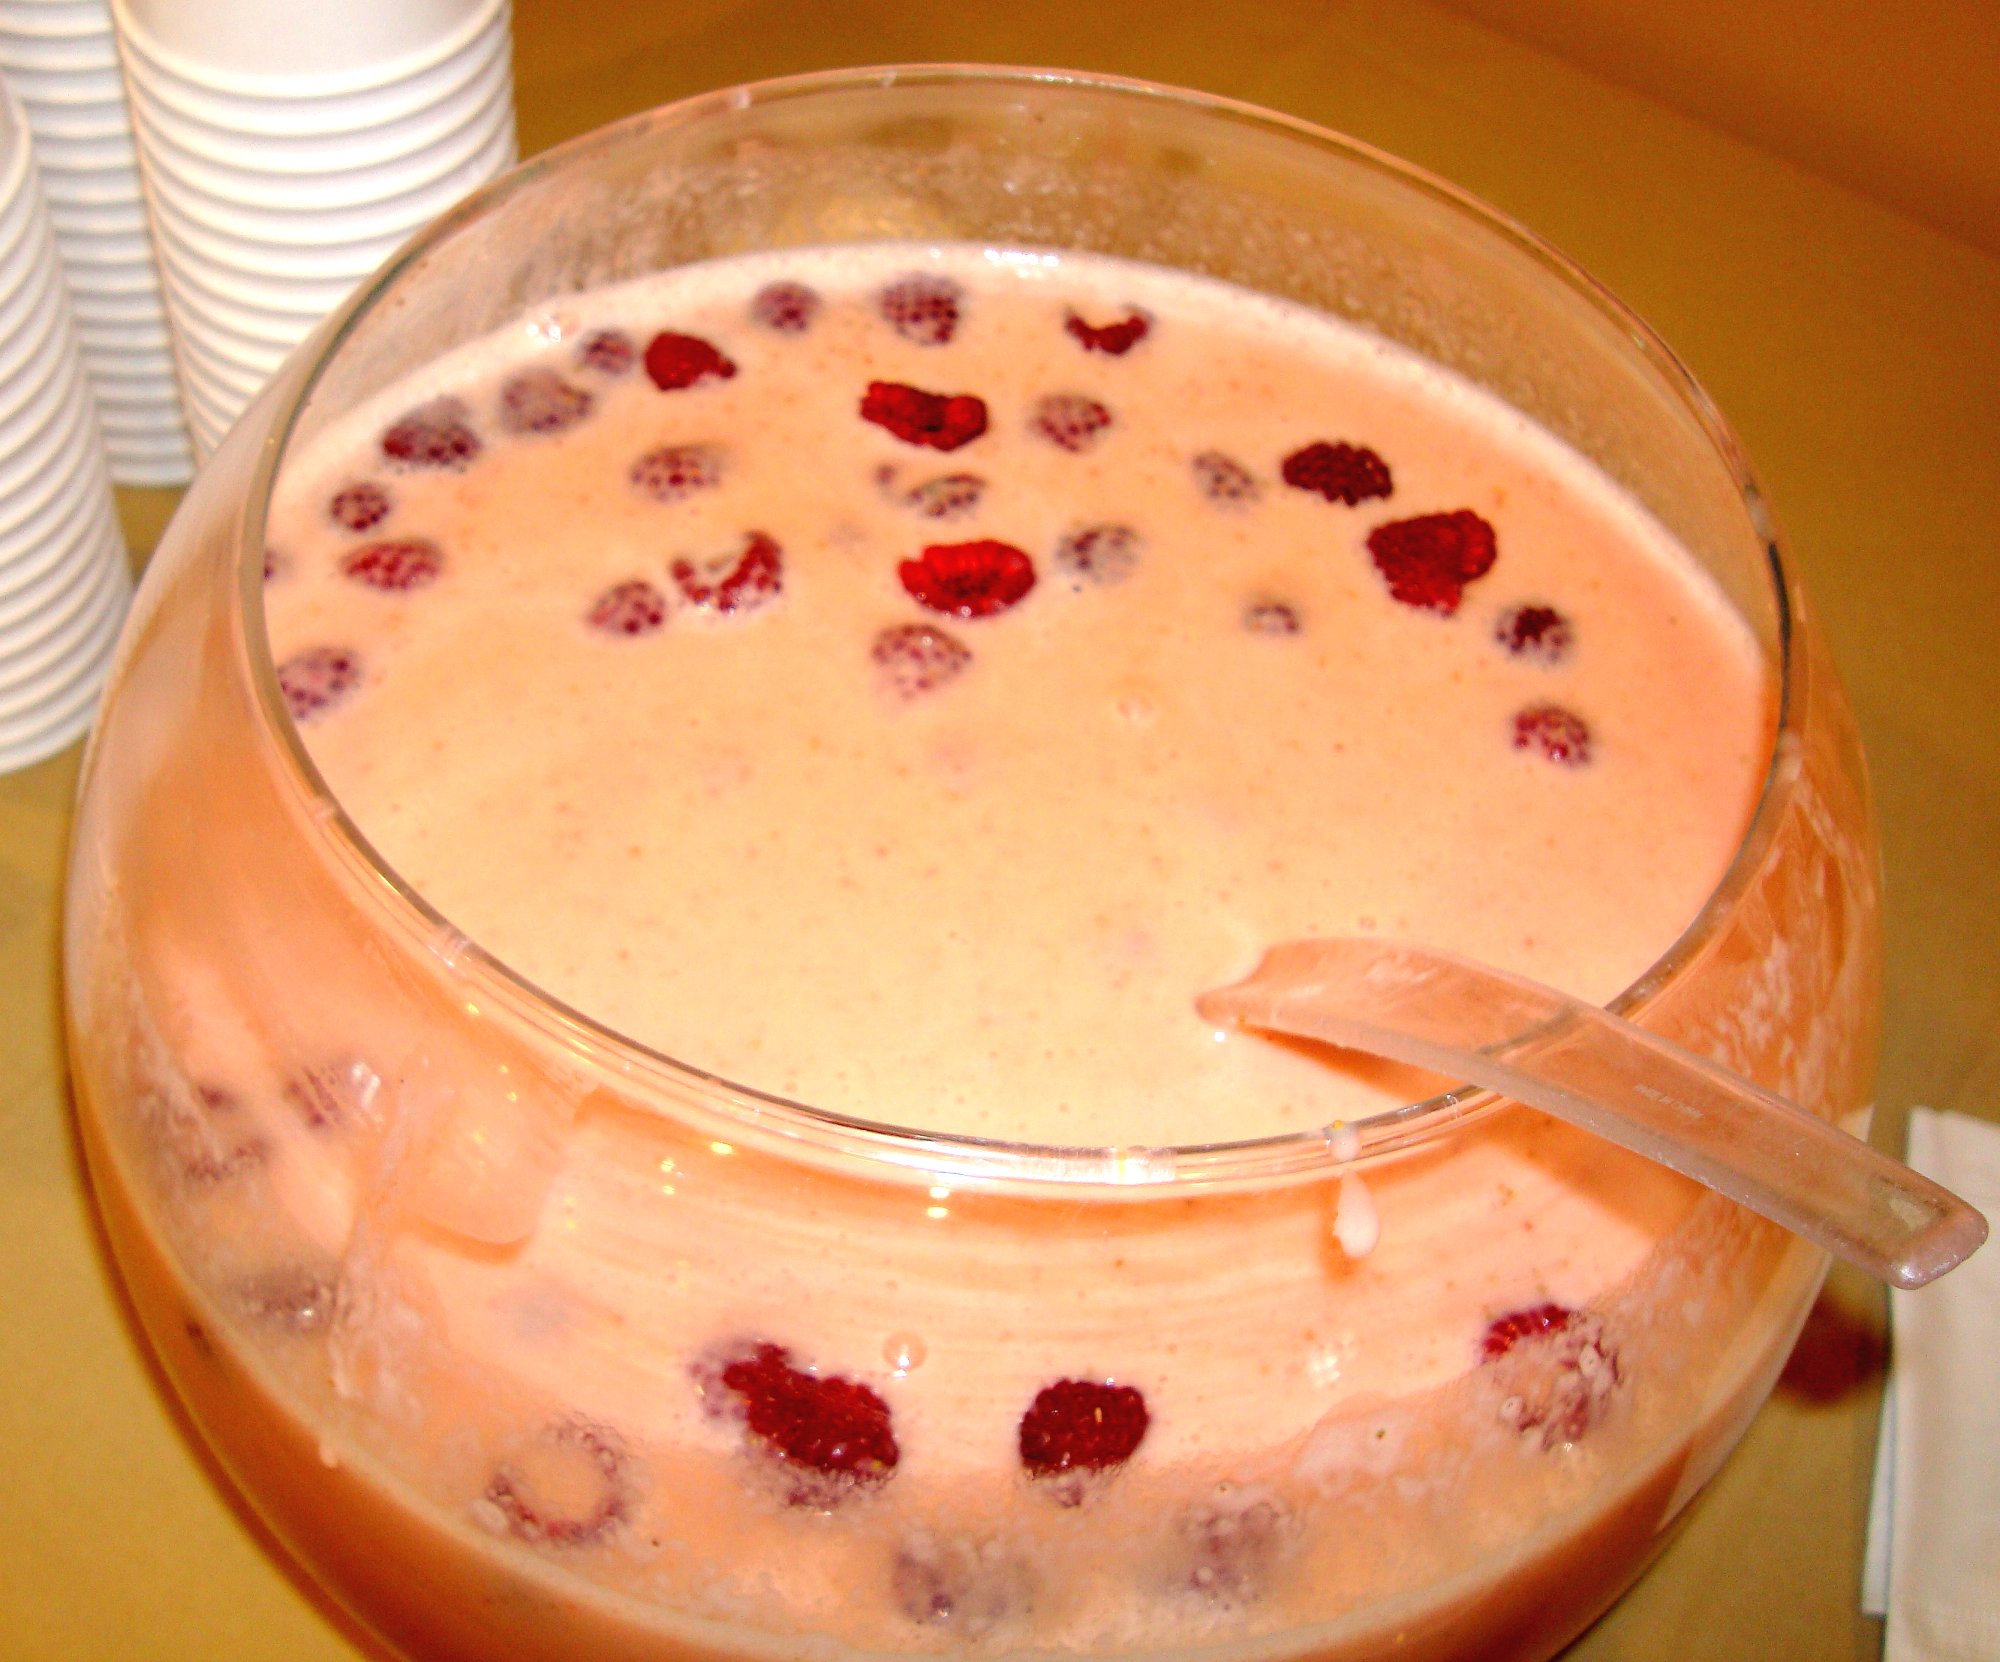 Smoothie with Raspberries Photo by I lee